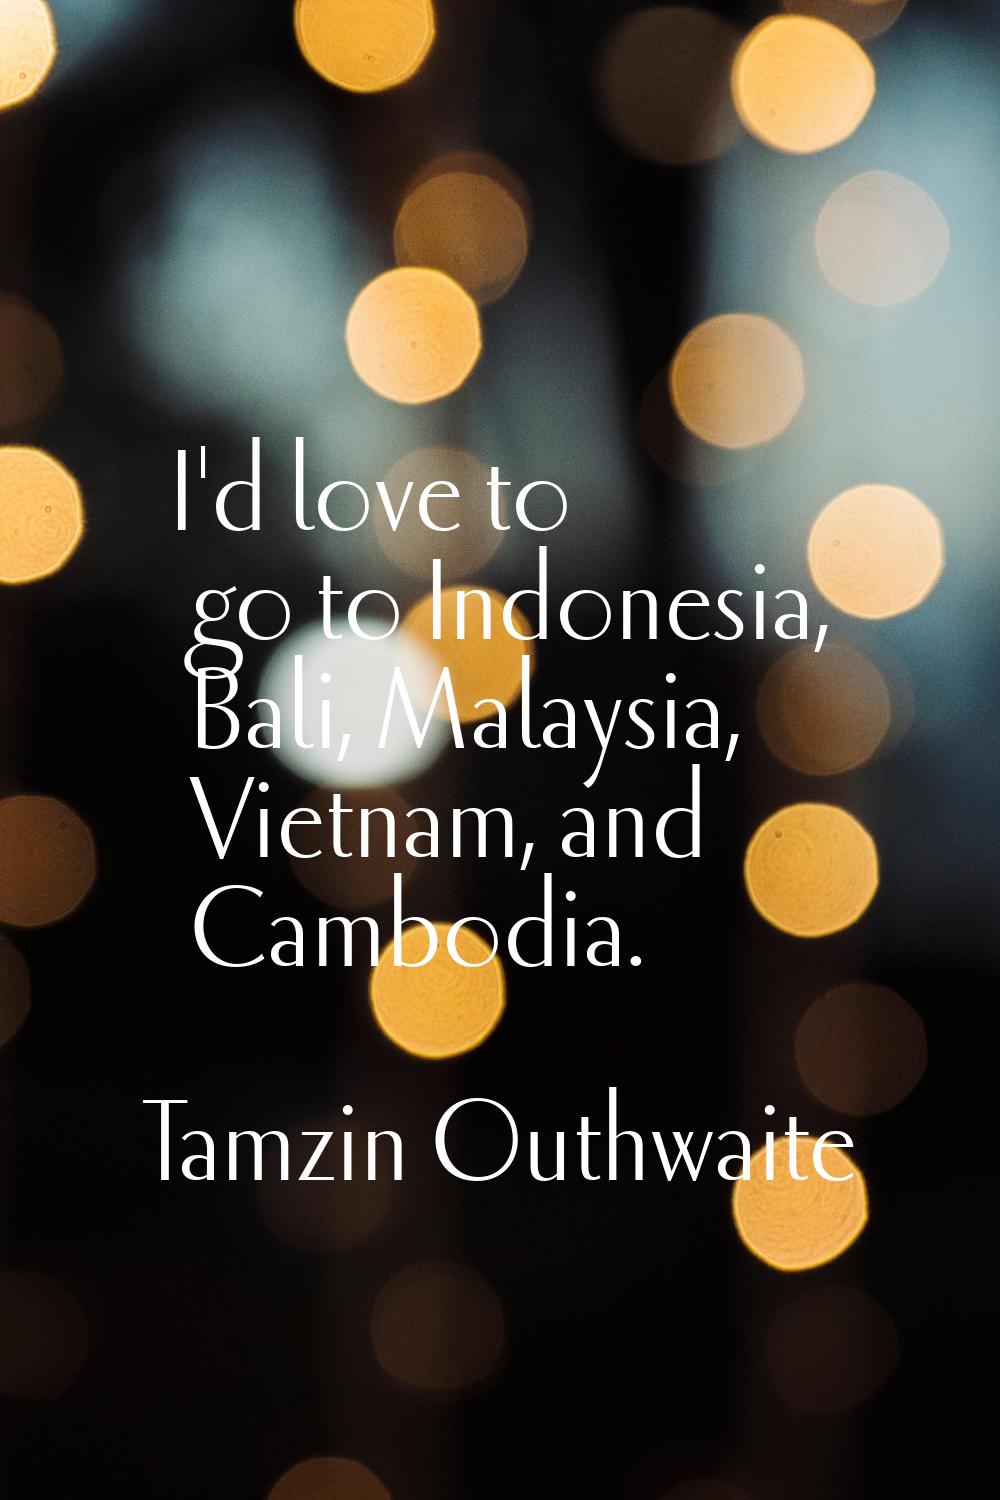 I'd love to go to Indonesia, Bali, Malaysia, Vietnam, and Cambodia.